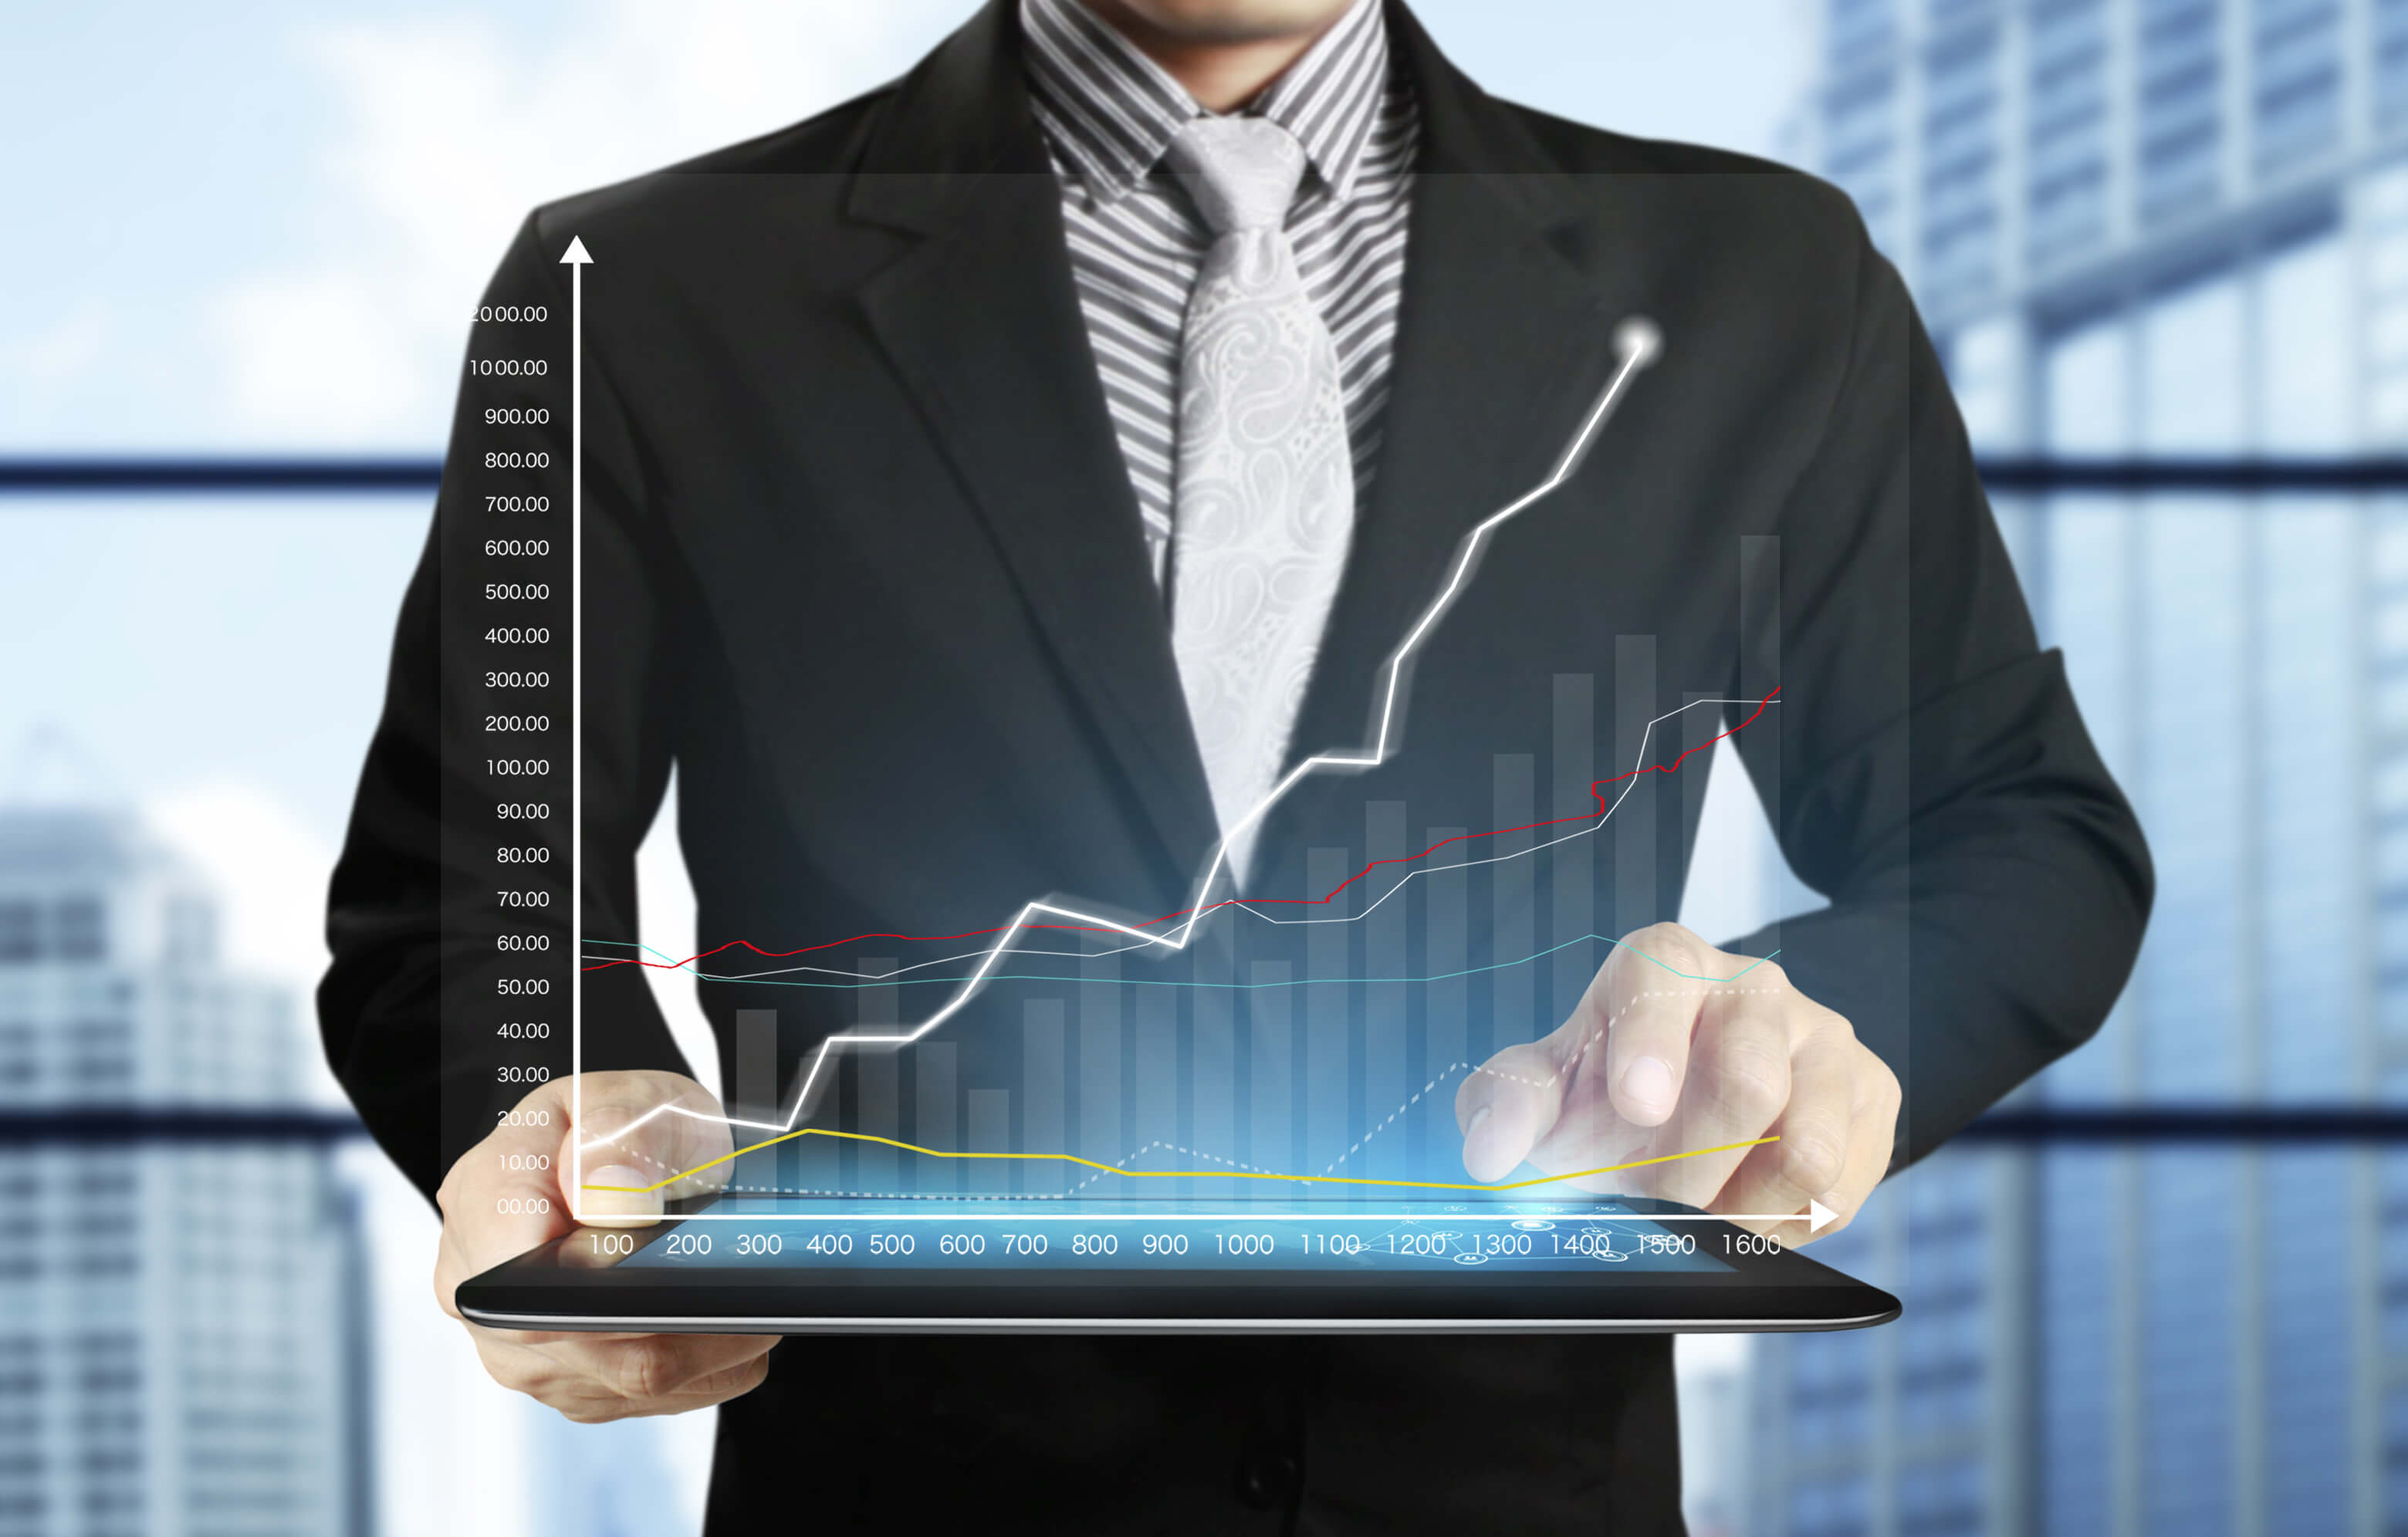 How to Use Data Analytics to Increase Your Small Business ROI